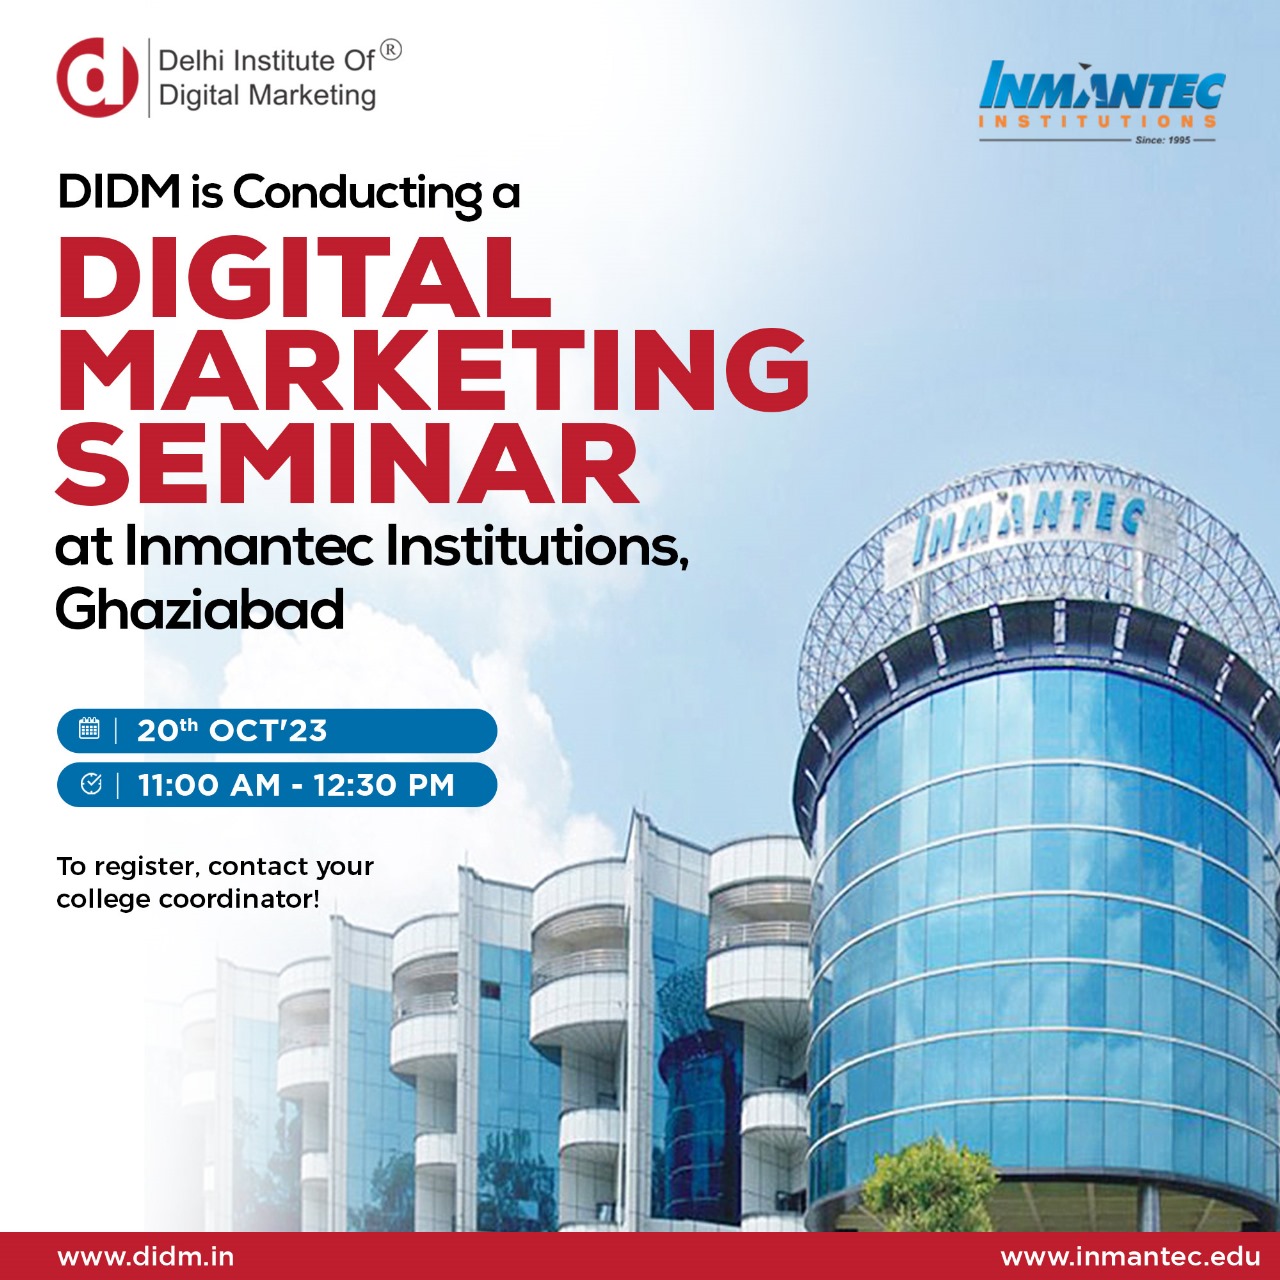 DIDM is conducting a digital marketing seminar at Inmantec Institutions, Ghaziabad